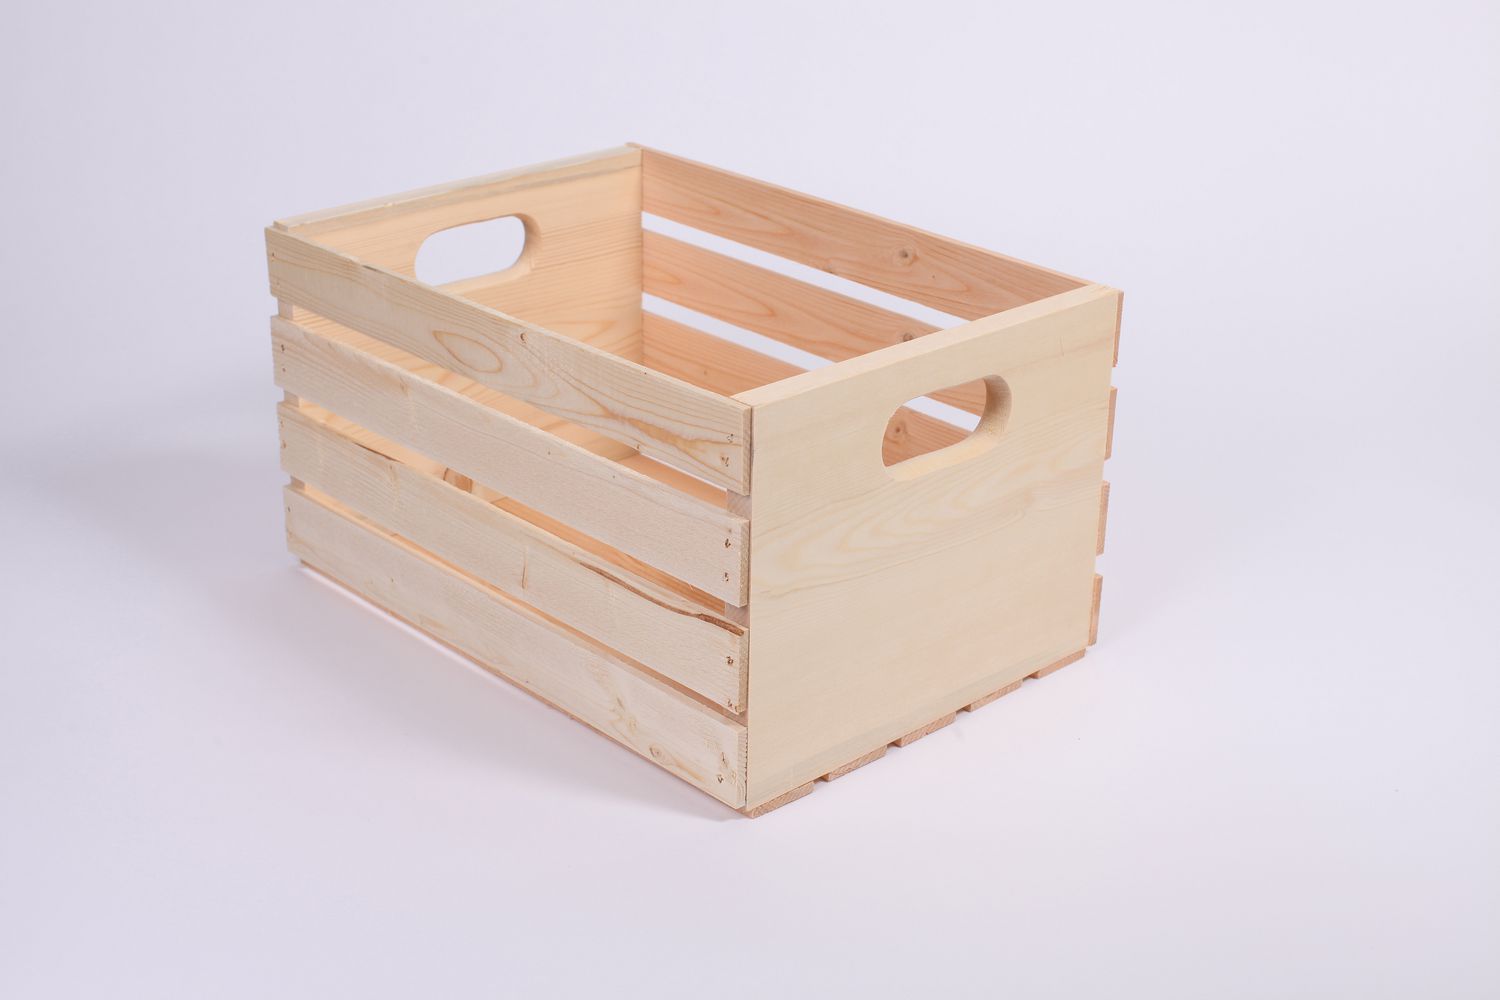 slatted crate storage crate 5" 18"wooden crate wood crate 